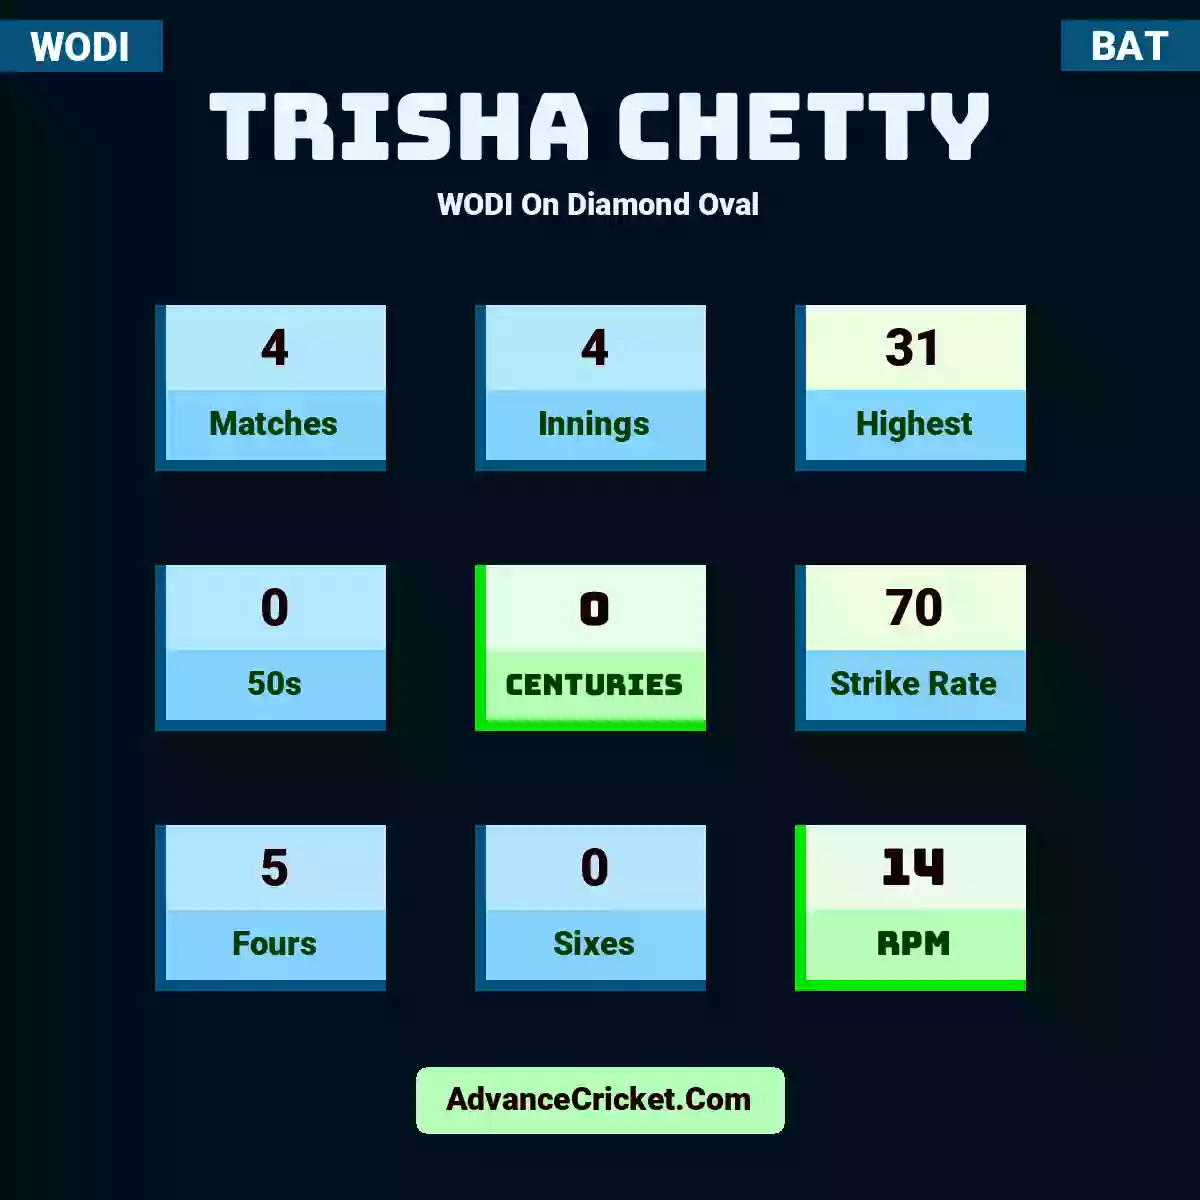 Trisha Chetty WODI  On Diamond Oval, Trisha Chetty played 4 matches, scored 31 runs as highest, 0 half-centuries, and 0 centuries, with a strike rate of 70. T.Chetty hit 5 fours and 0 sixes, with an RPM of 14.